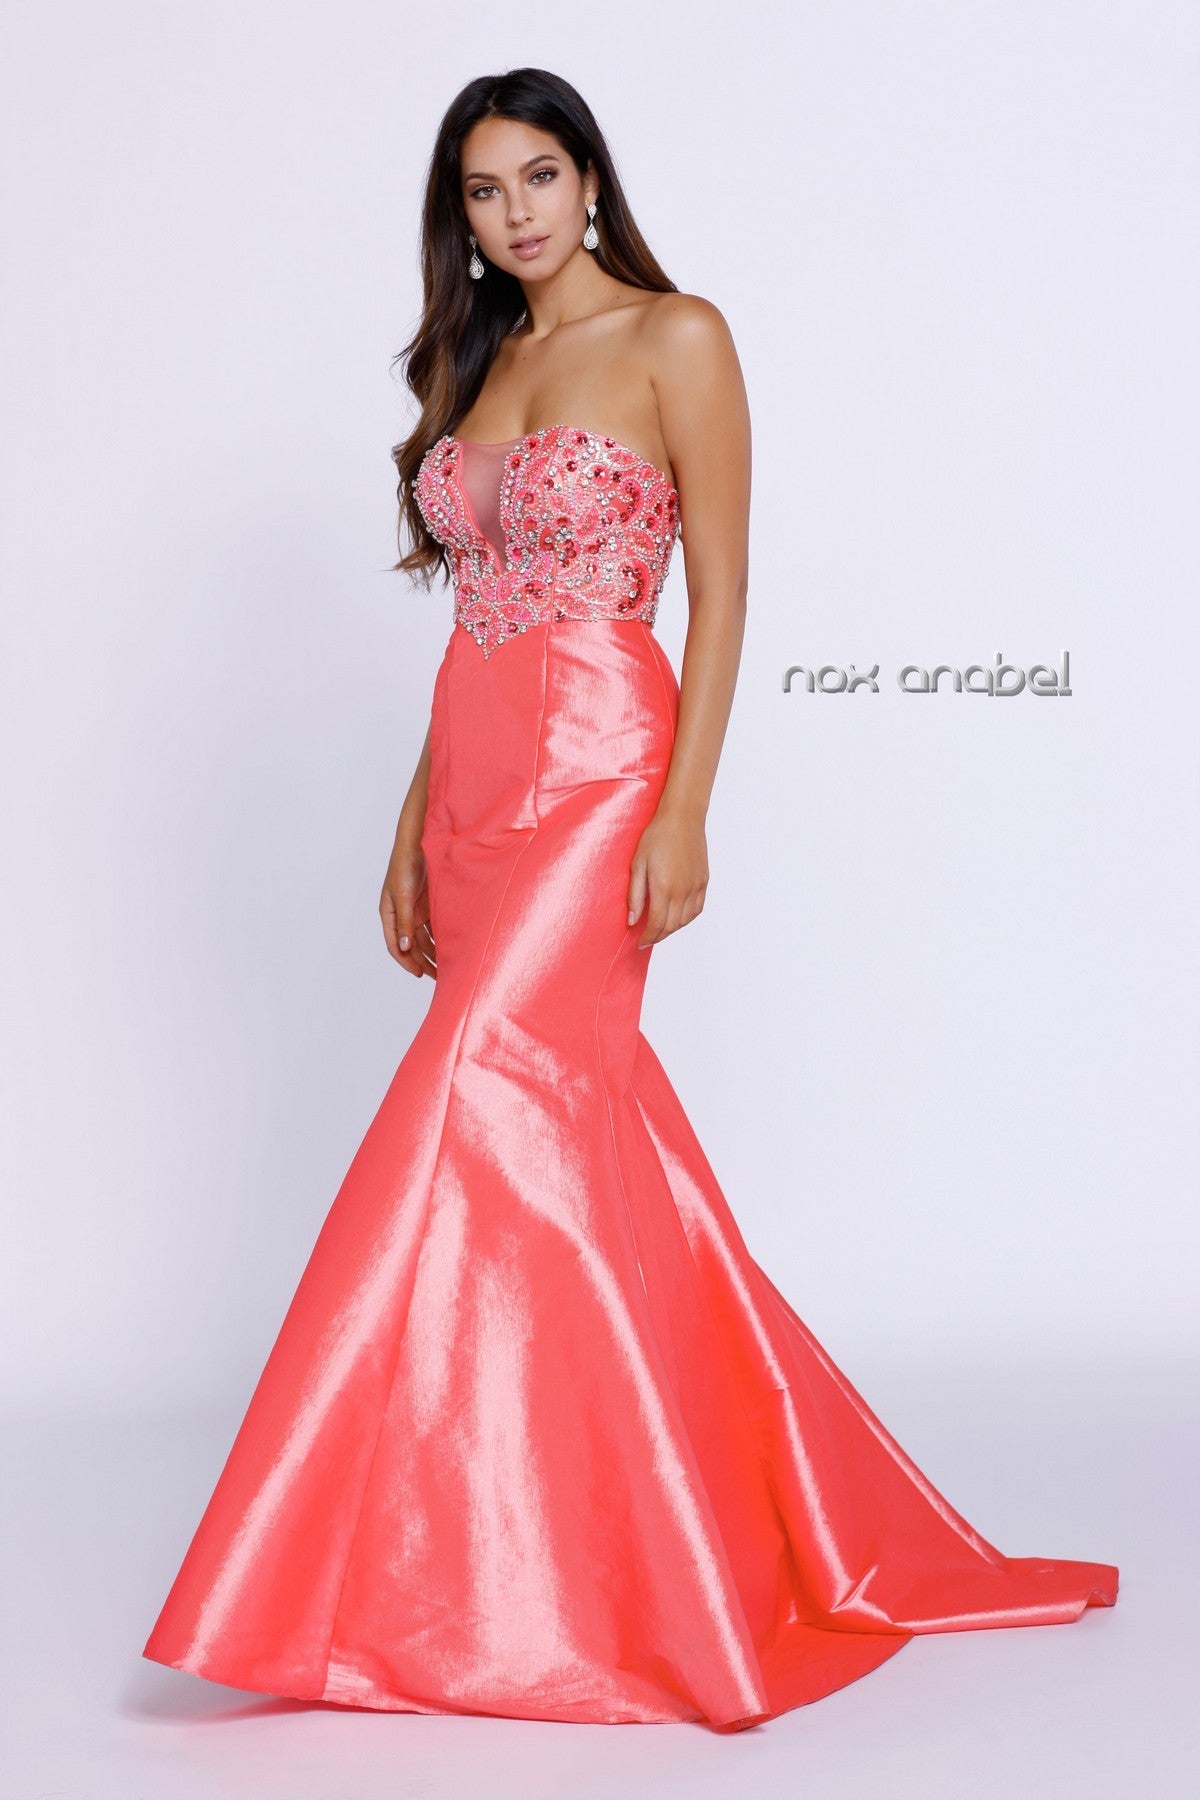 Nox Anabel 8244 Long Fitted taffeta Mermaid Prom Dress Beaded Bodice Formal Gown Illusion V neckline with sweetheart silhouette. Sequins, Beading & Rhinestone Accents. Sweeping train great pageant gown  Sizes: 2  Colors: Coral